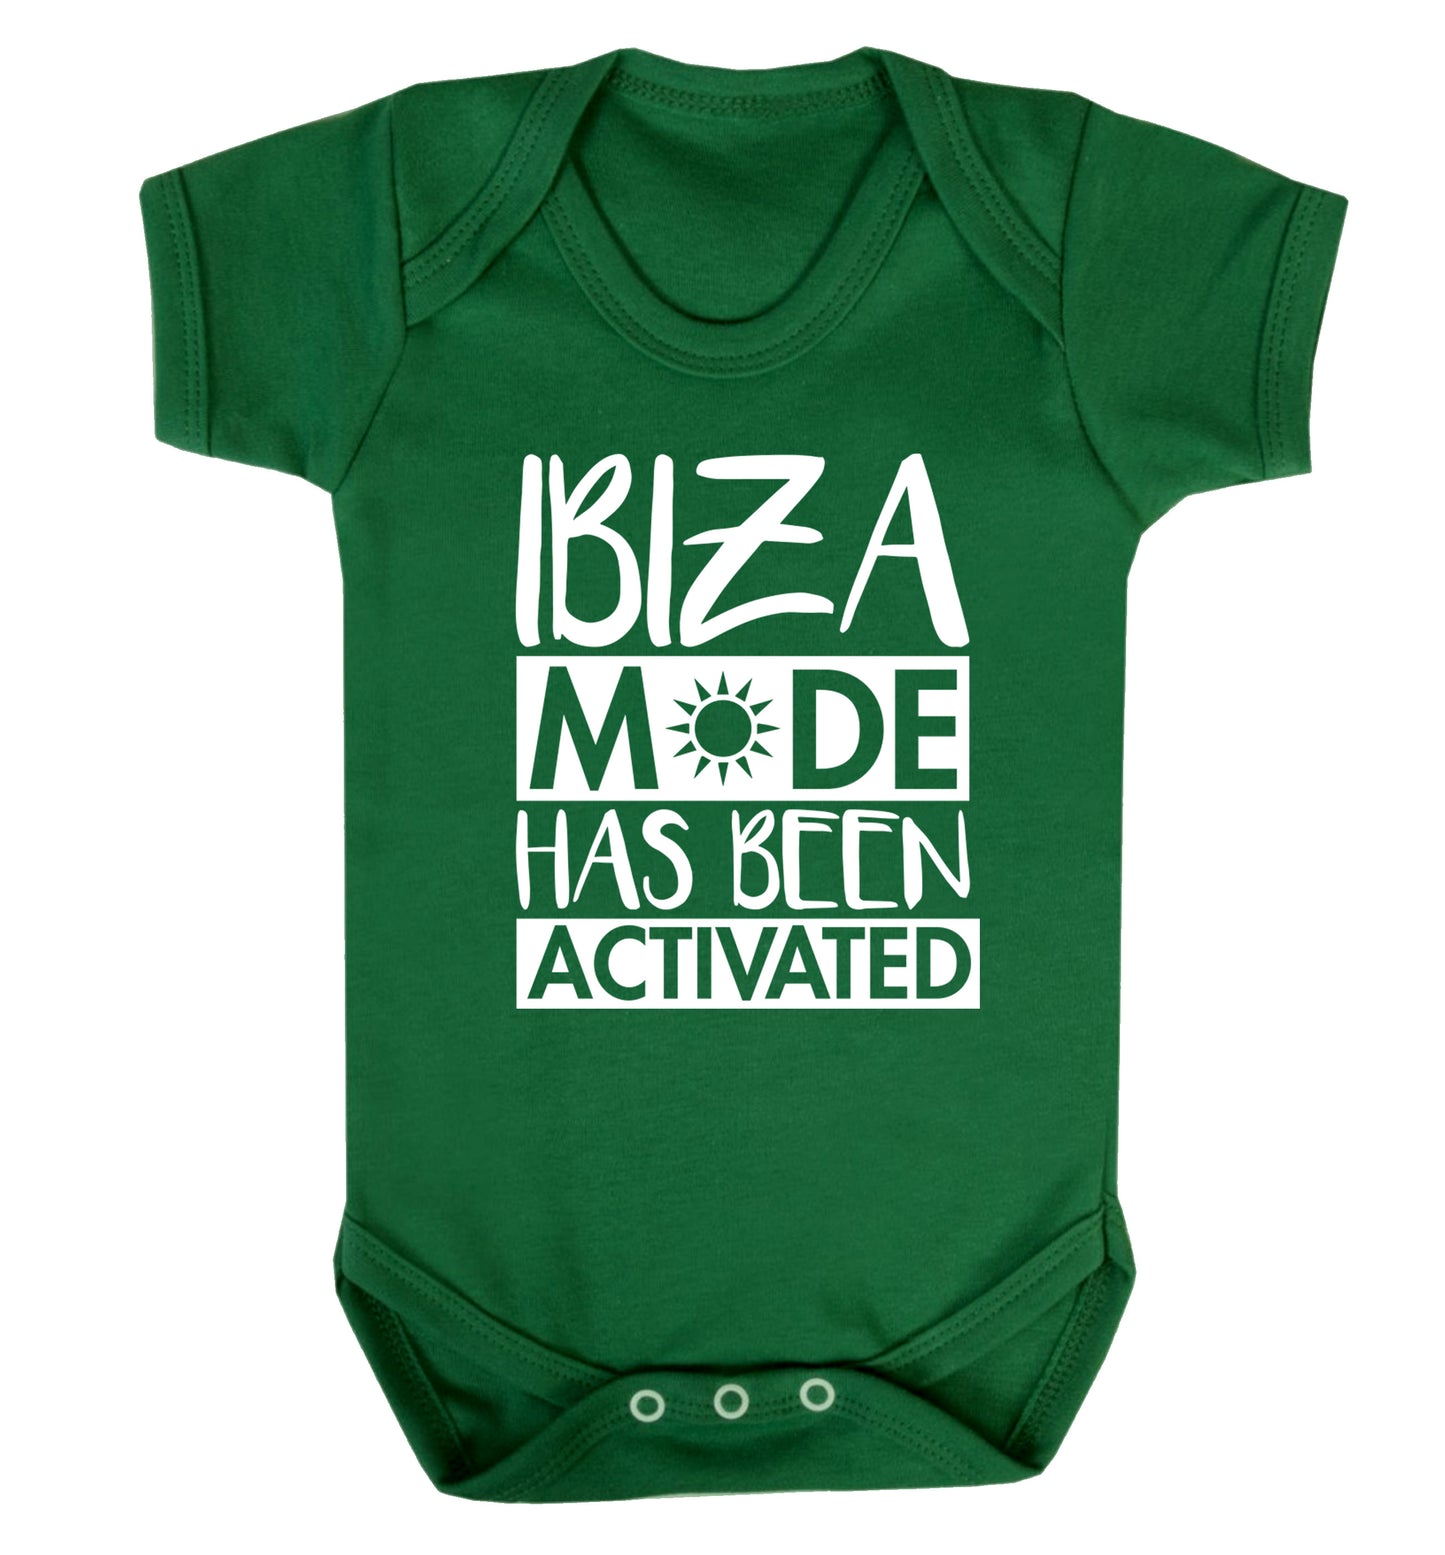 Ibiza mode has been activated Baby Vest green 18-24 months